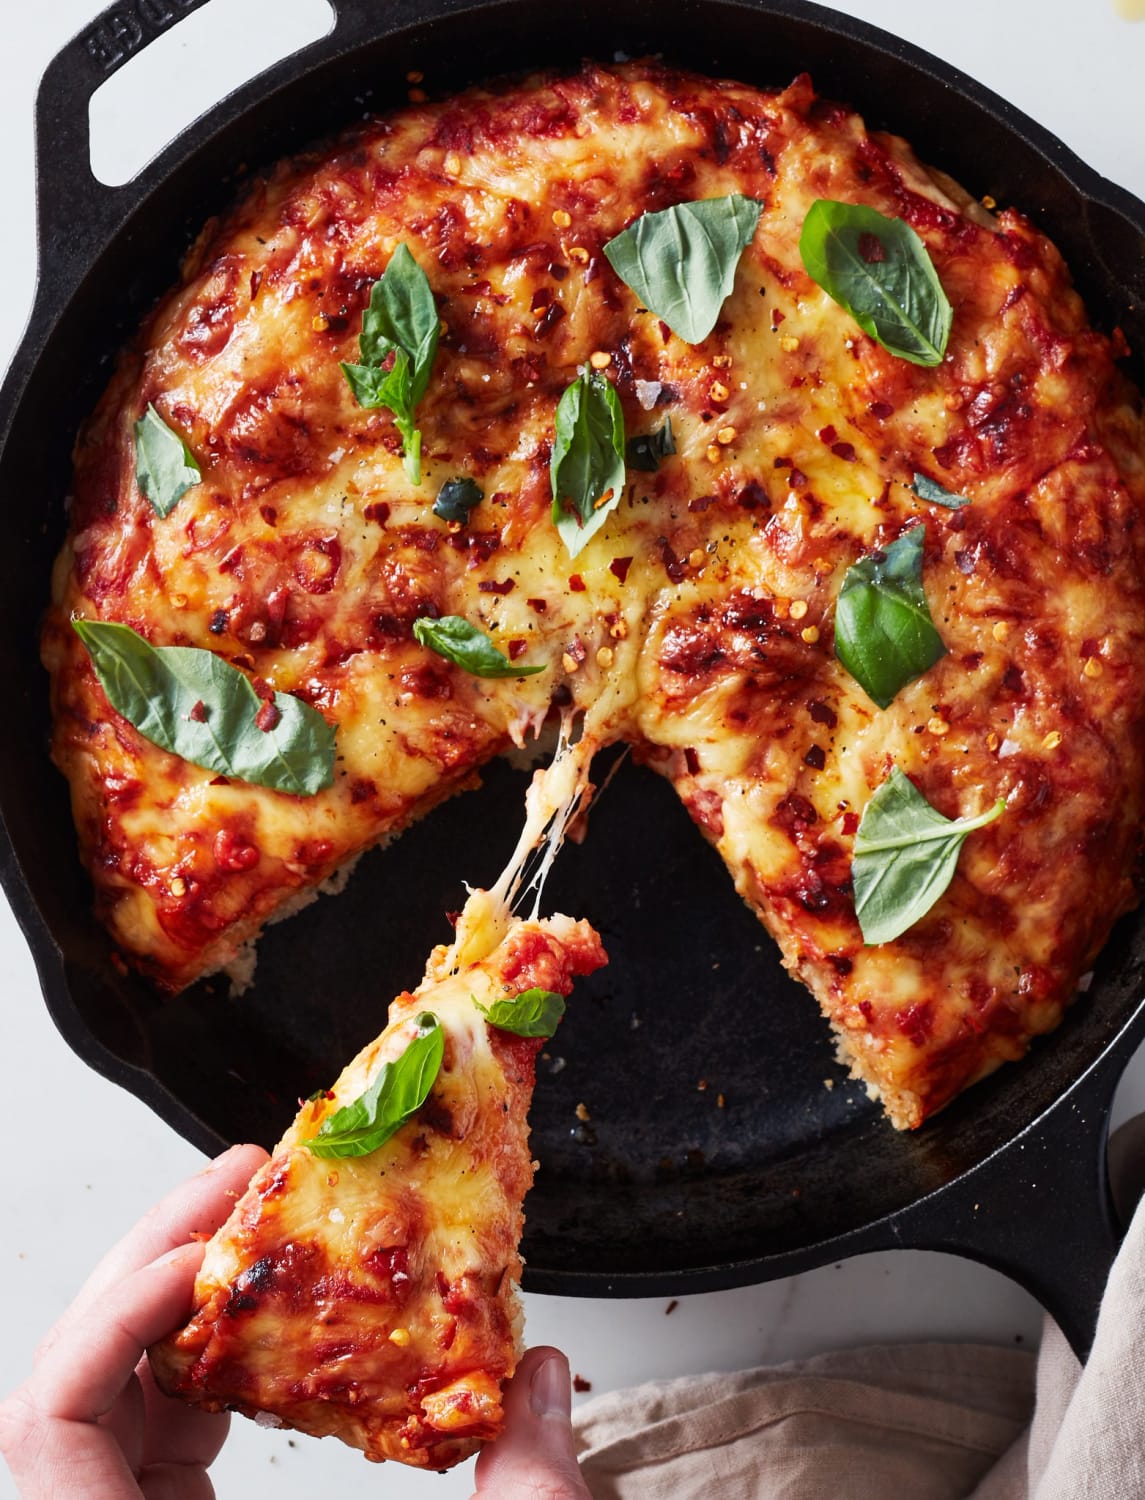 This crispy, cheesy pan pizza is the absolute best way to make pizza at home: